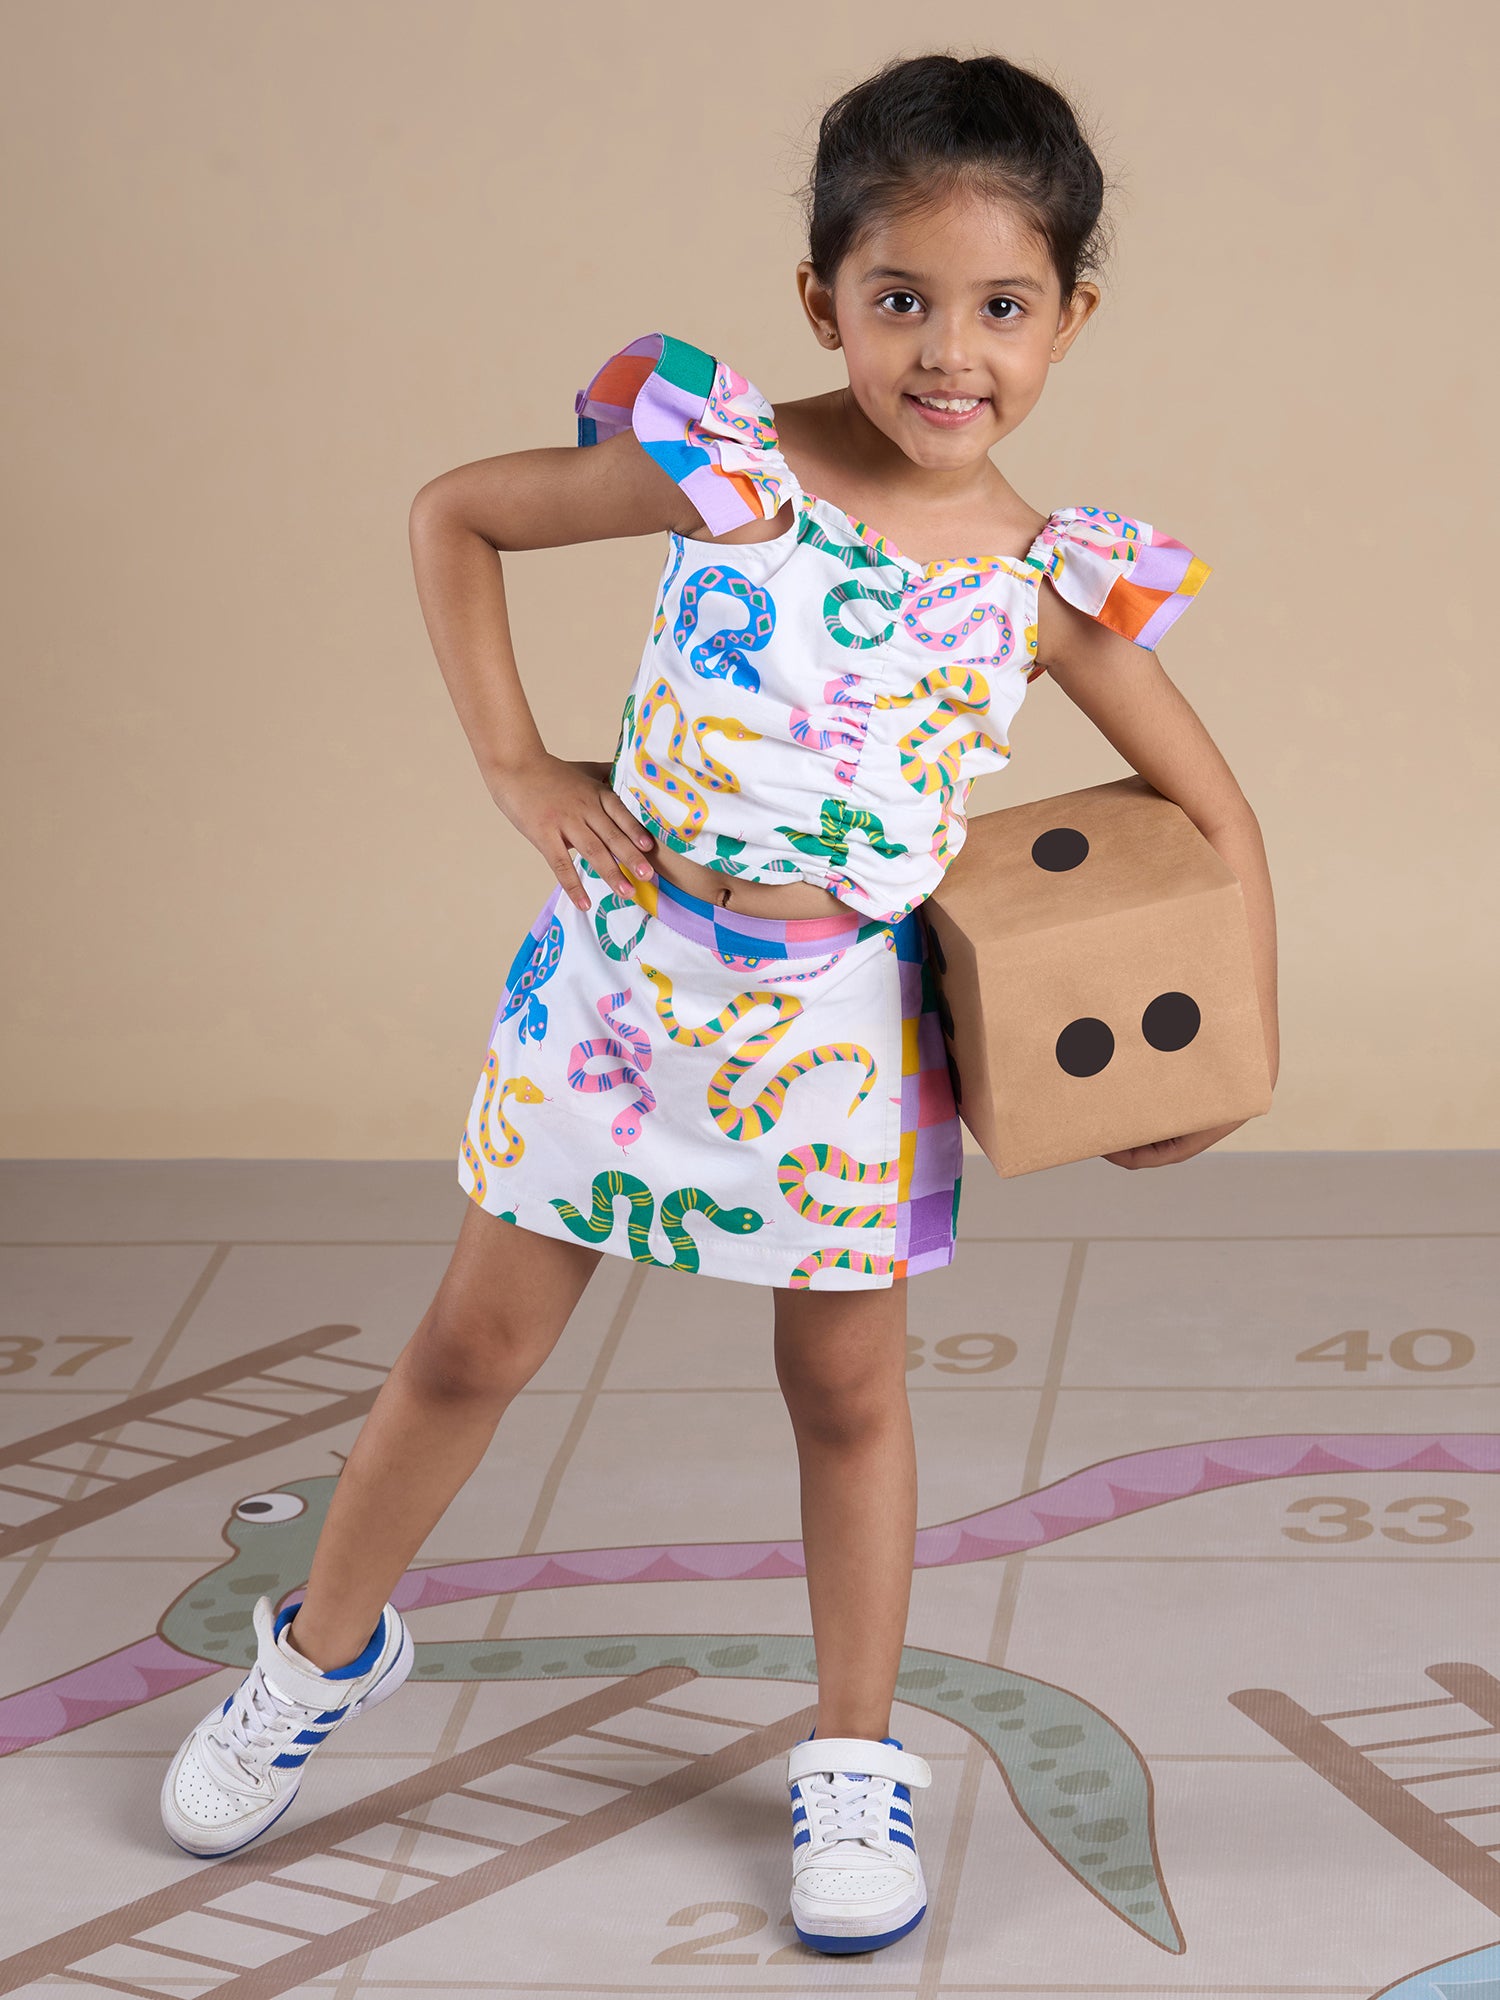 Snakes And Ladders Girls Multi Color Snake Print Top And Shorts Set From Siblings Collection - Lil Drama